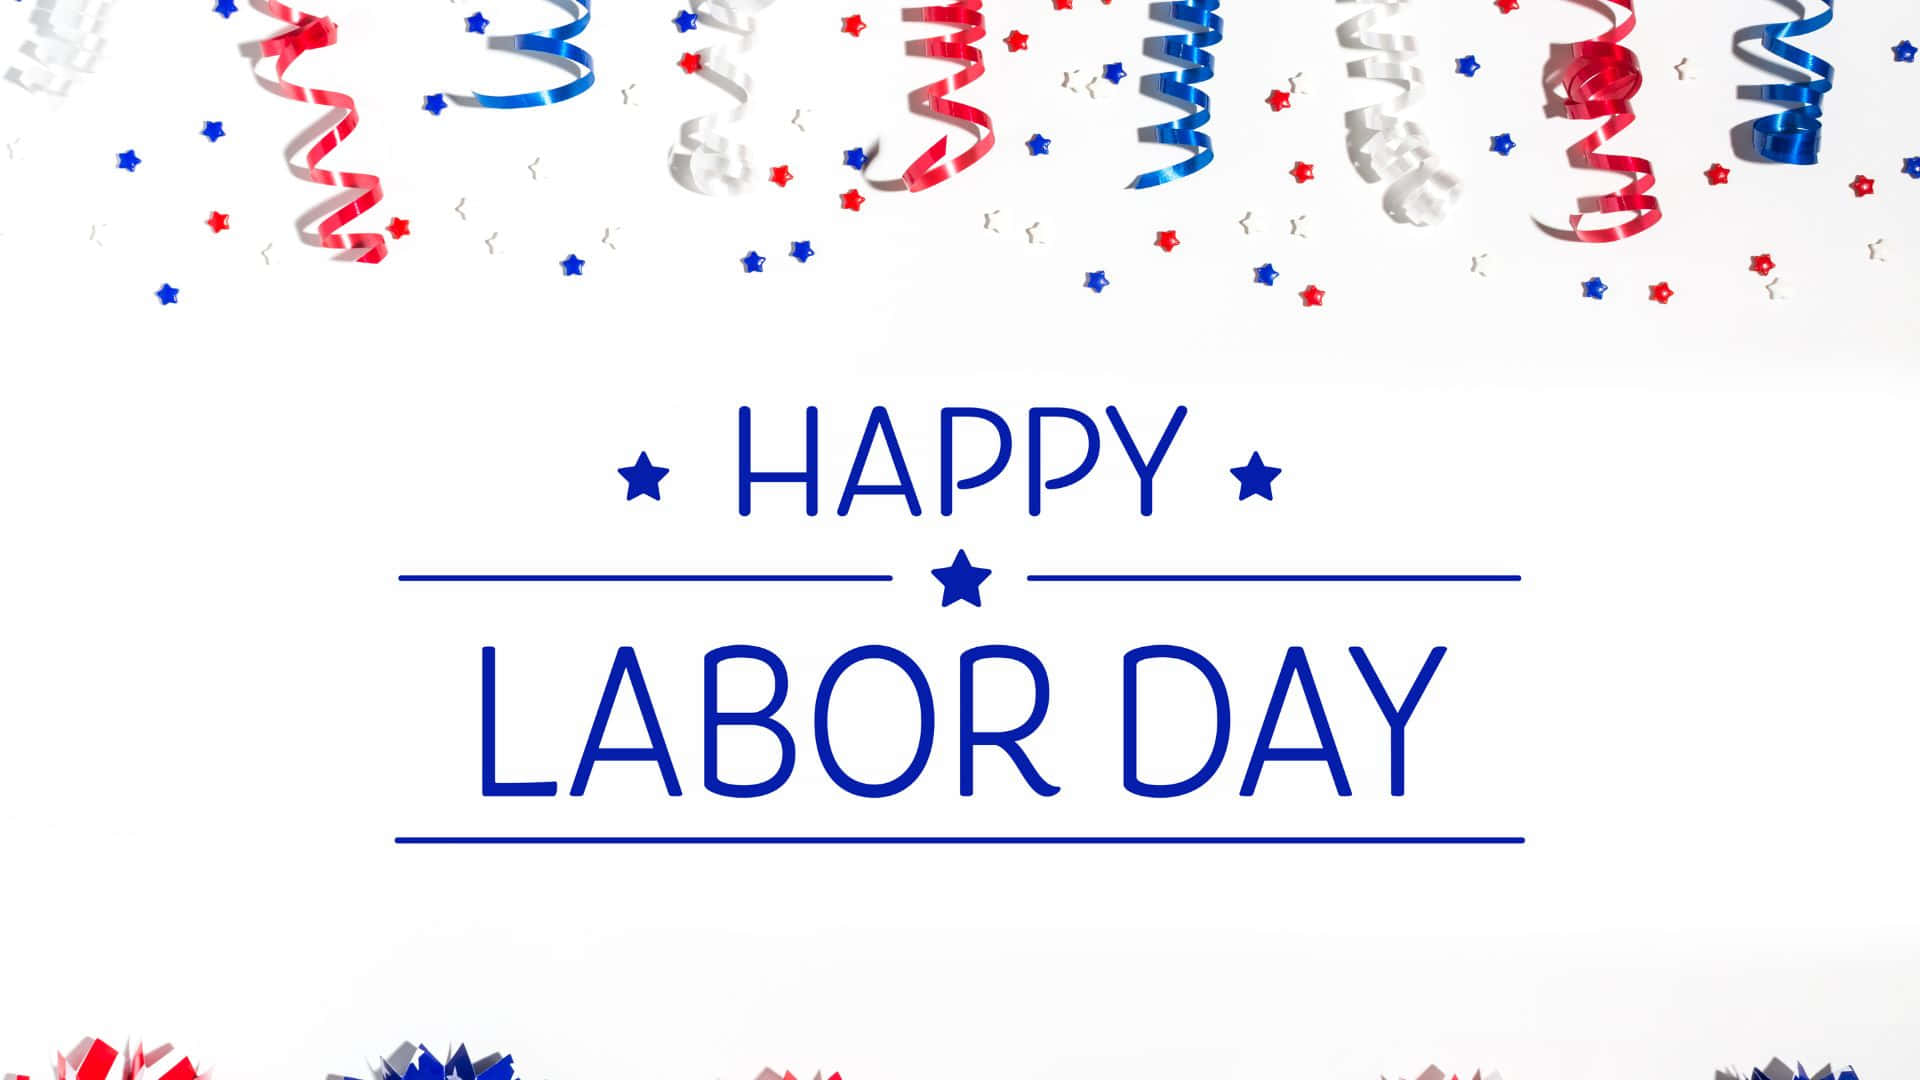 Celebrating Labor Day with American spirit